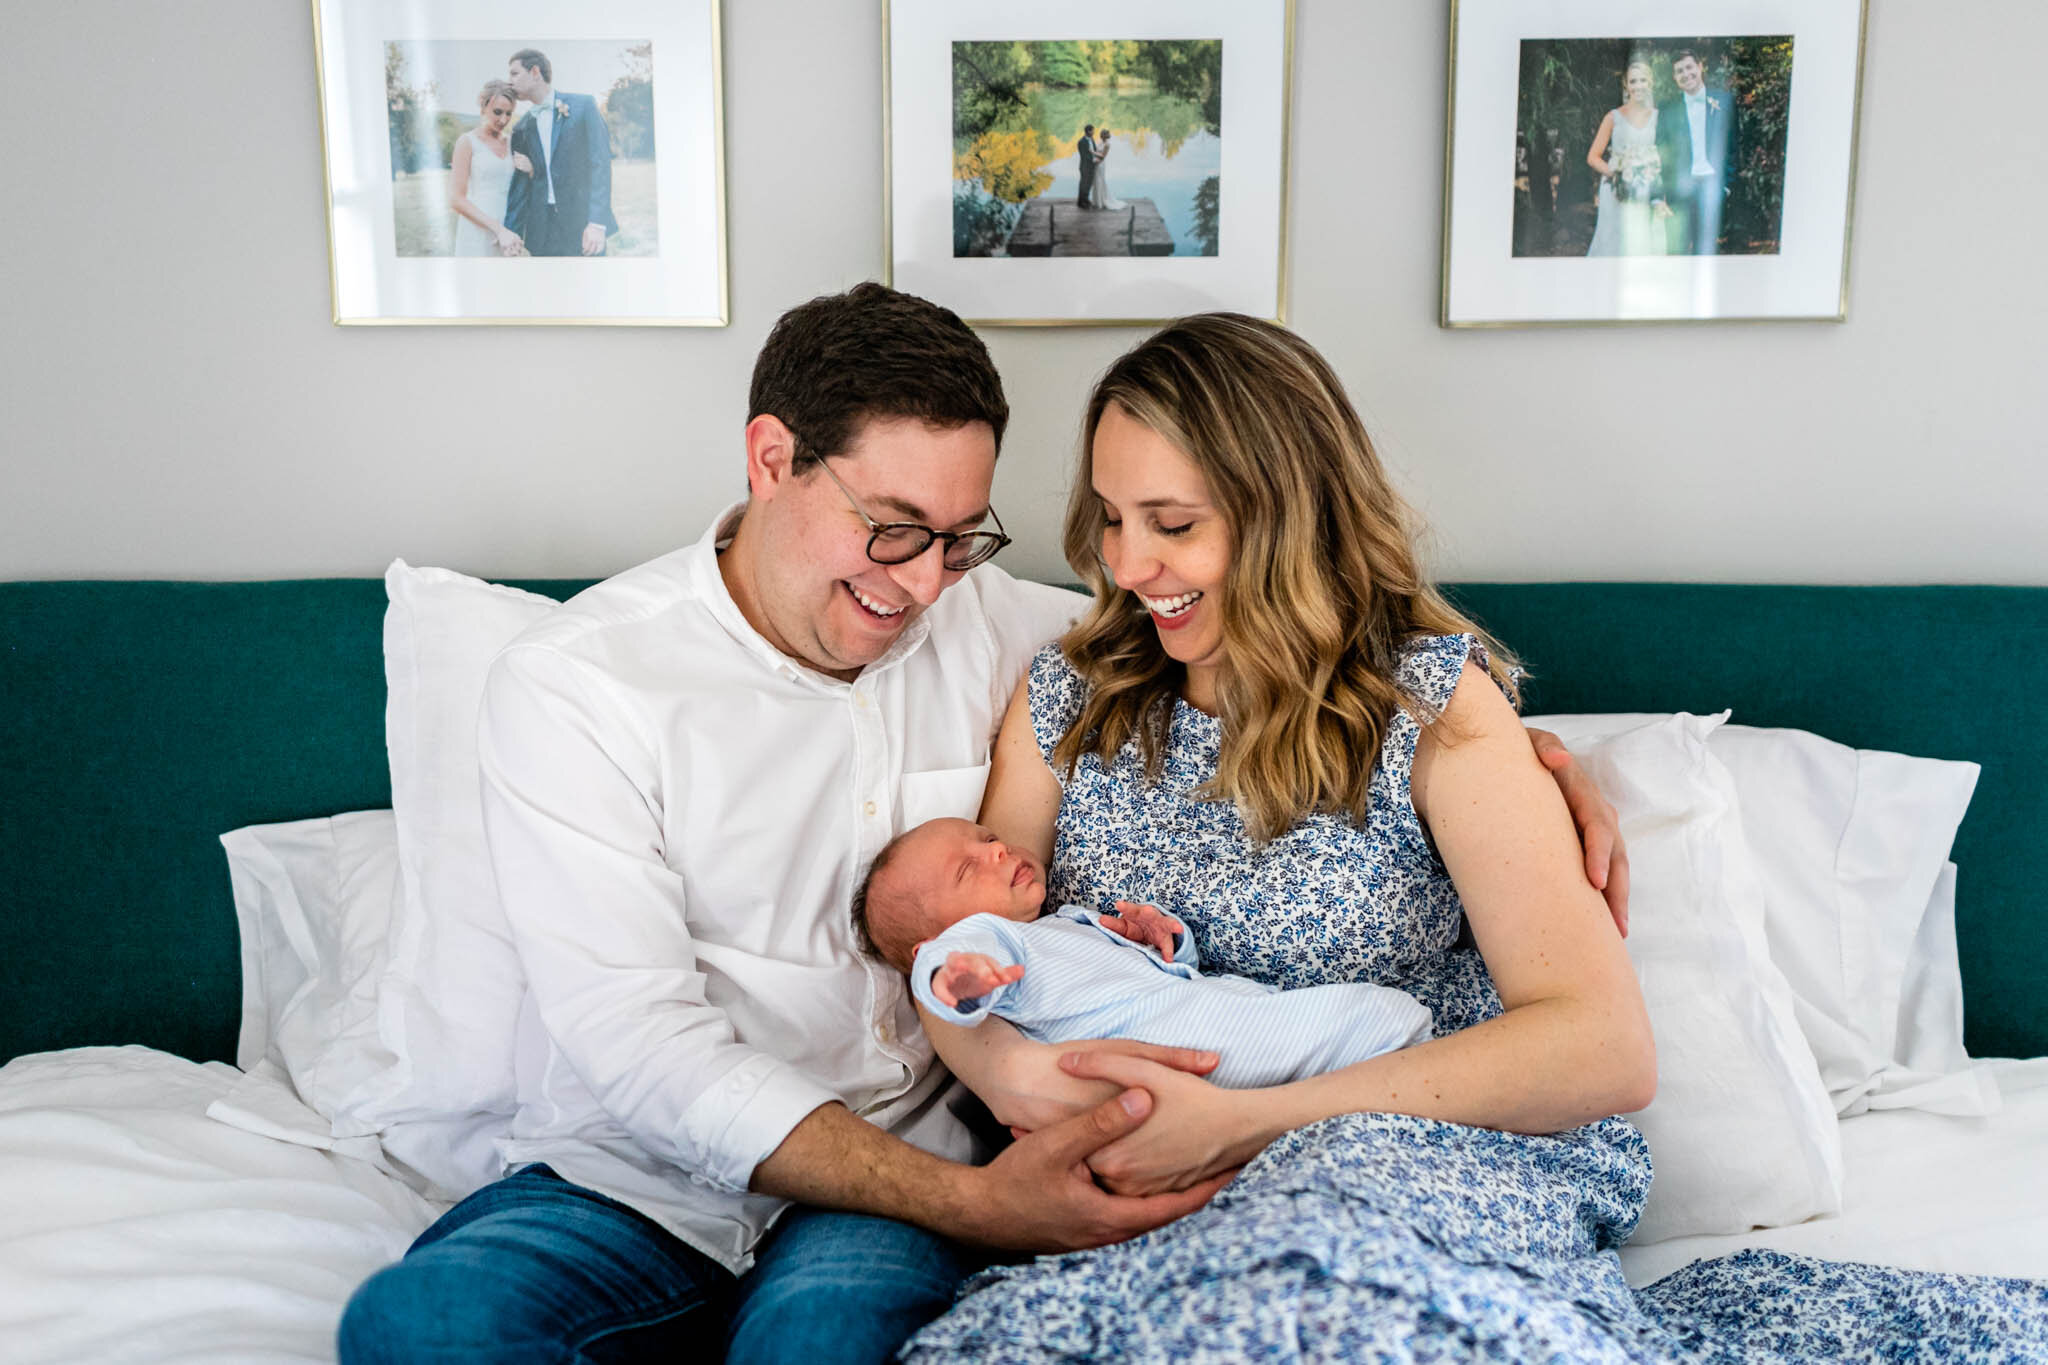 Couple sitting on bed with baby in their arms | Lifestyle newborn photography at home | Greensboro Newborn Photographer | By G. Lin Photography